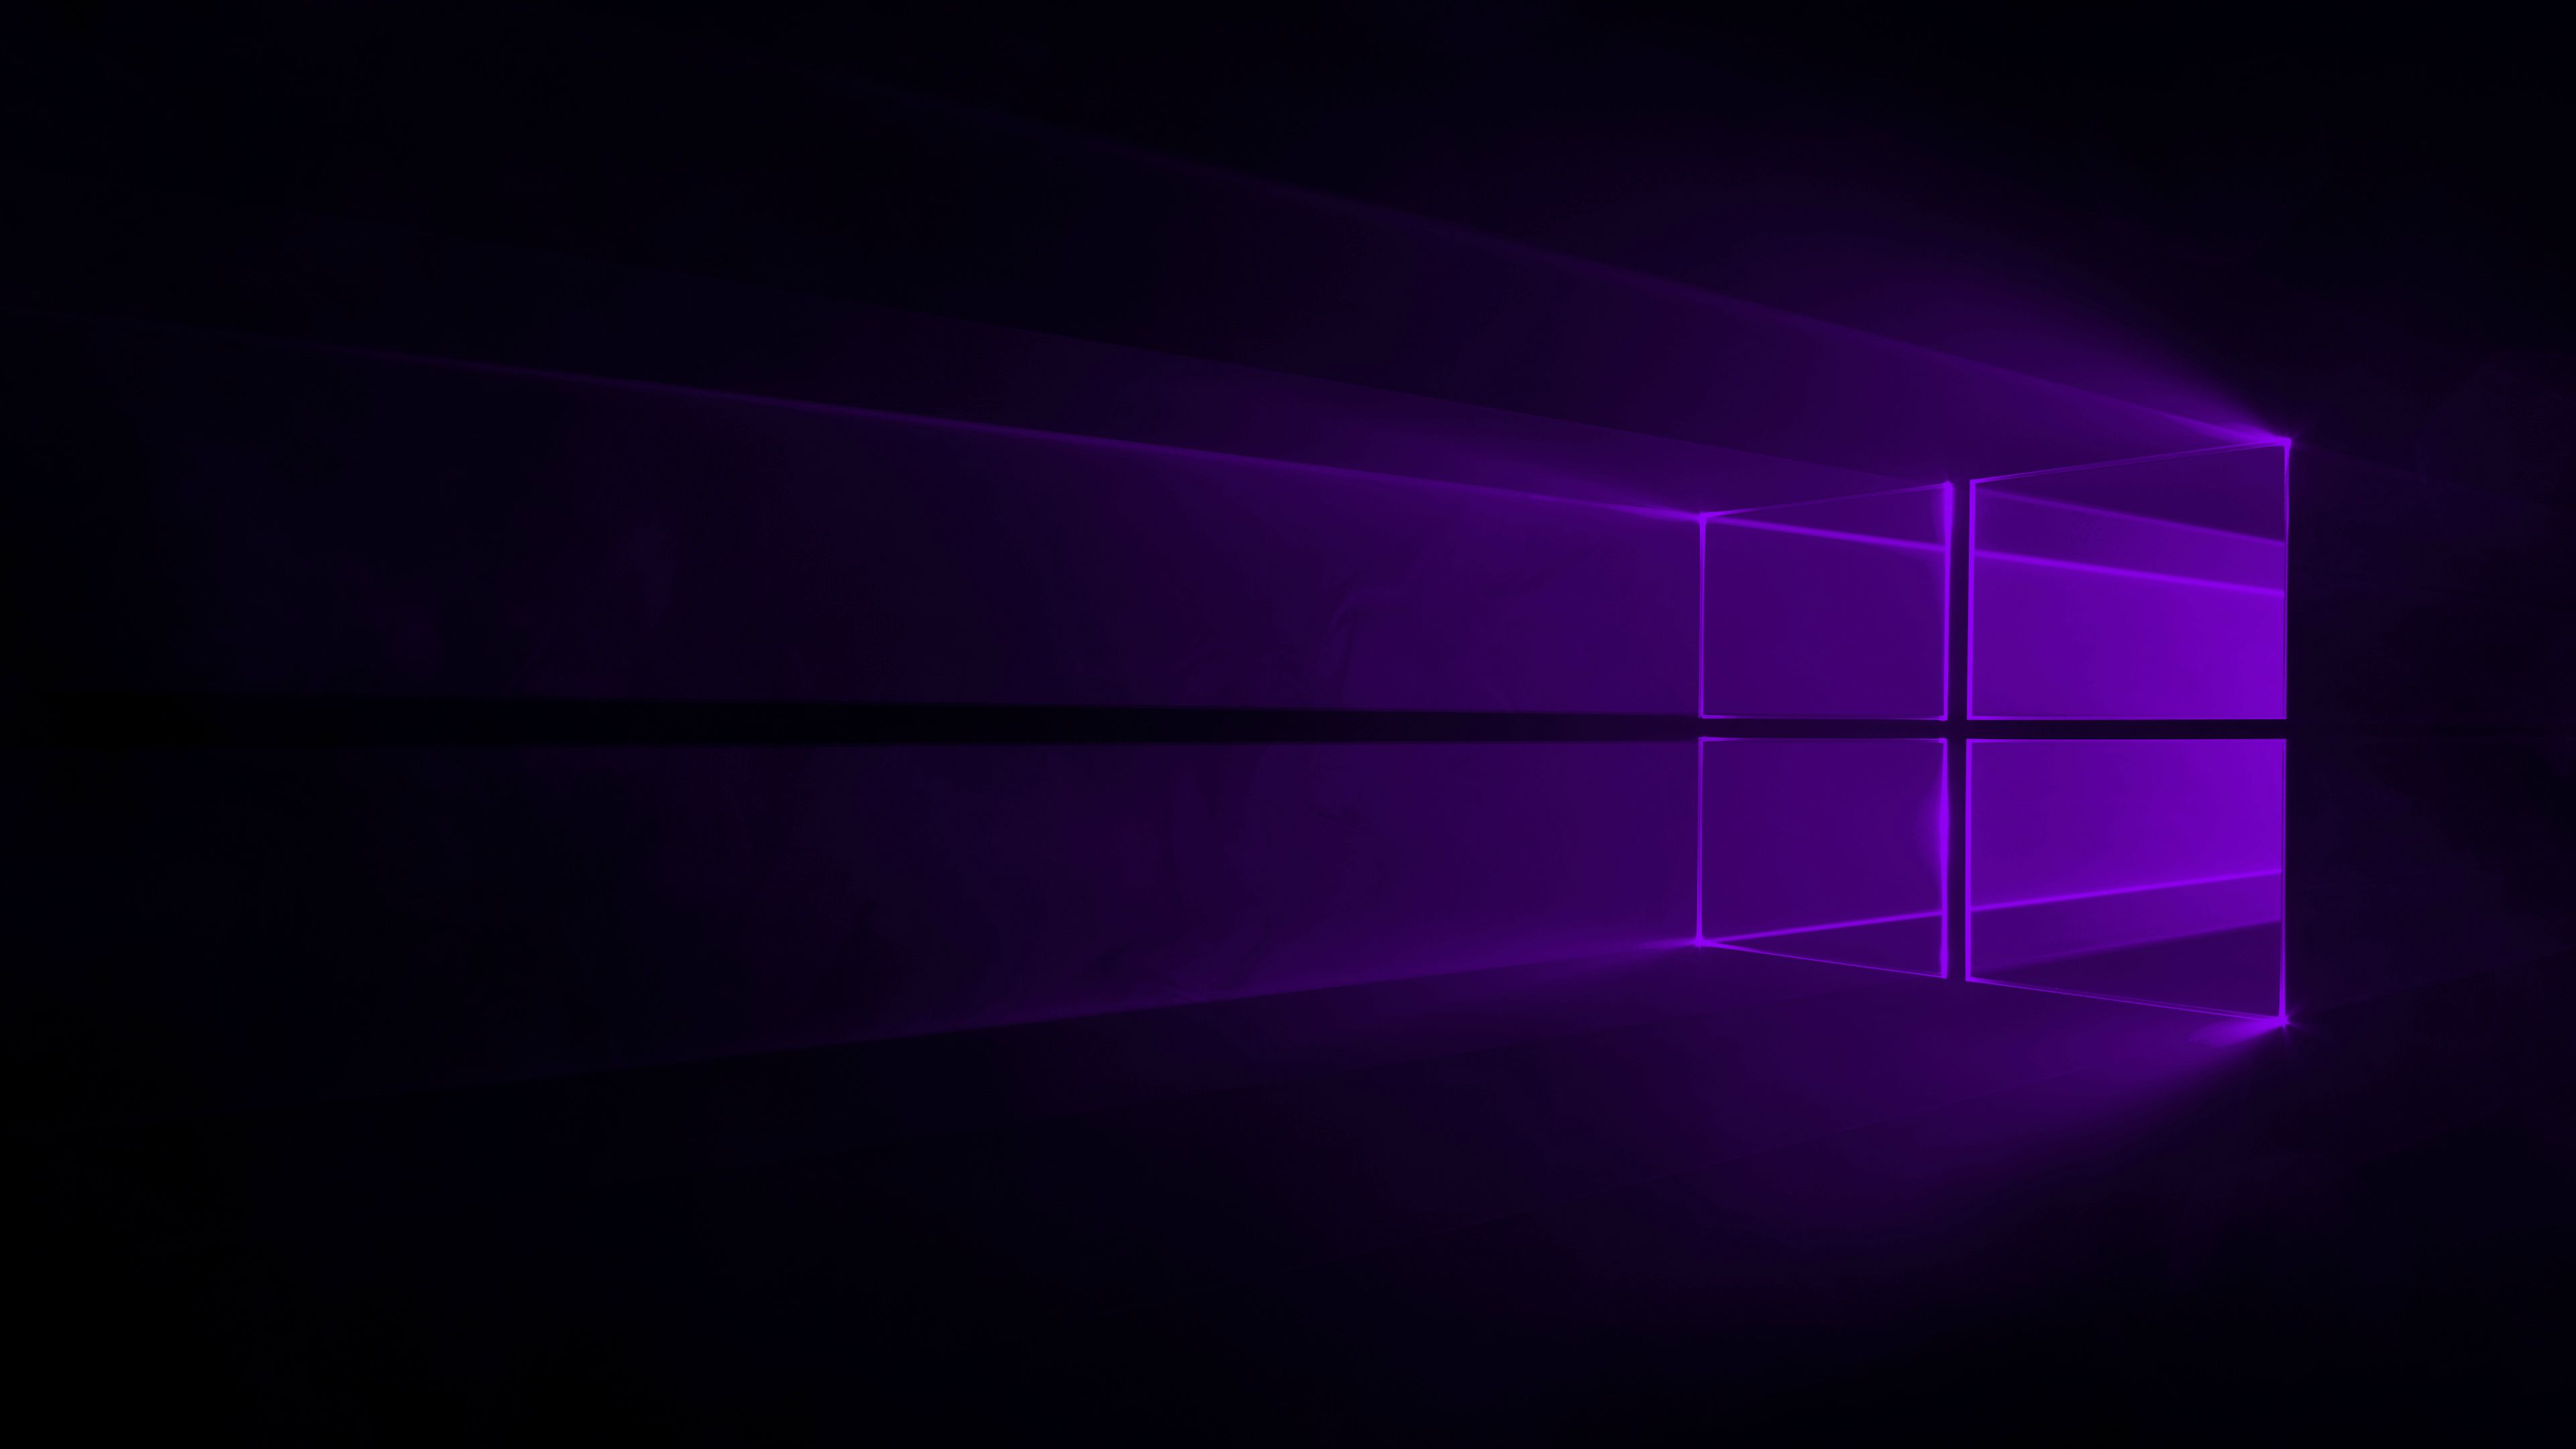 I changed the colour of the Windows 10 wallpaper